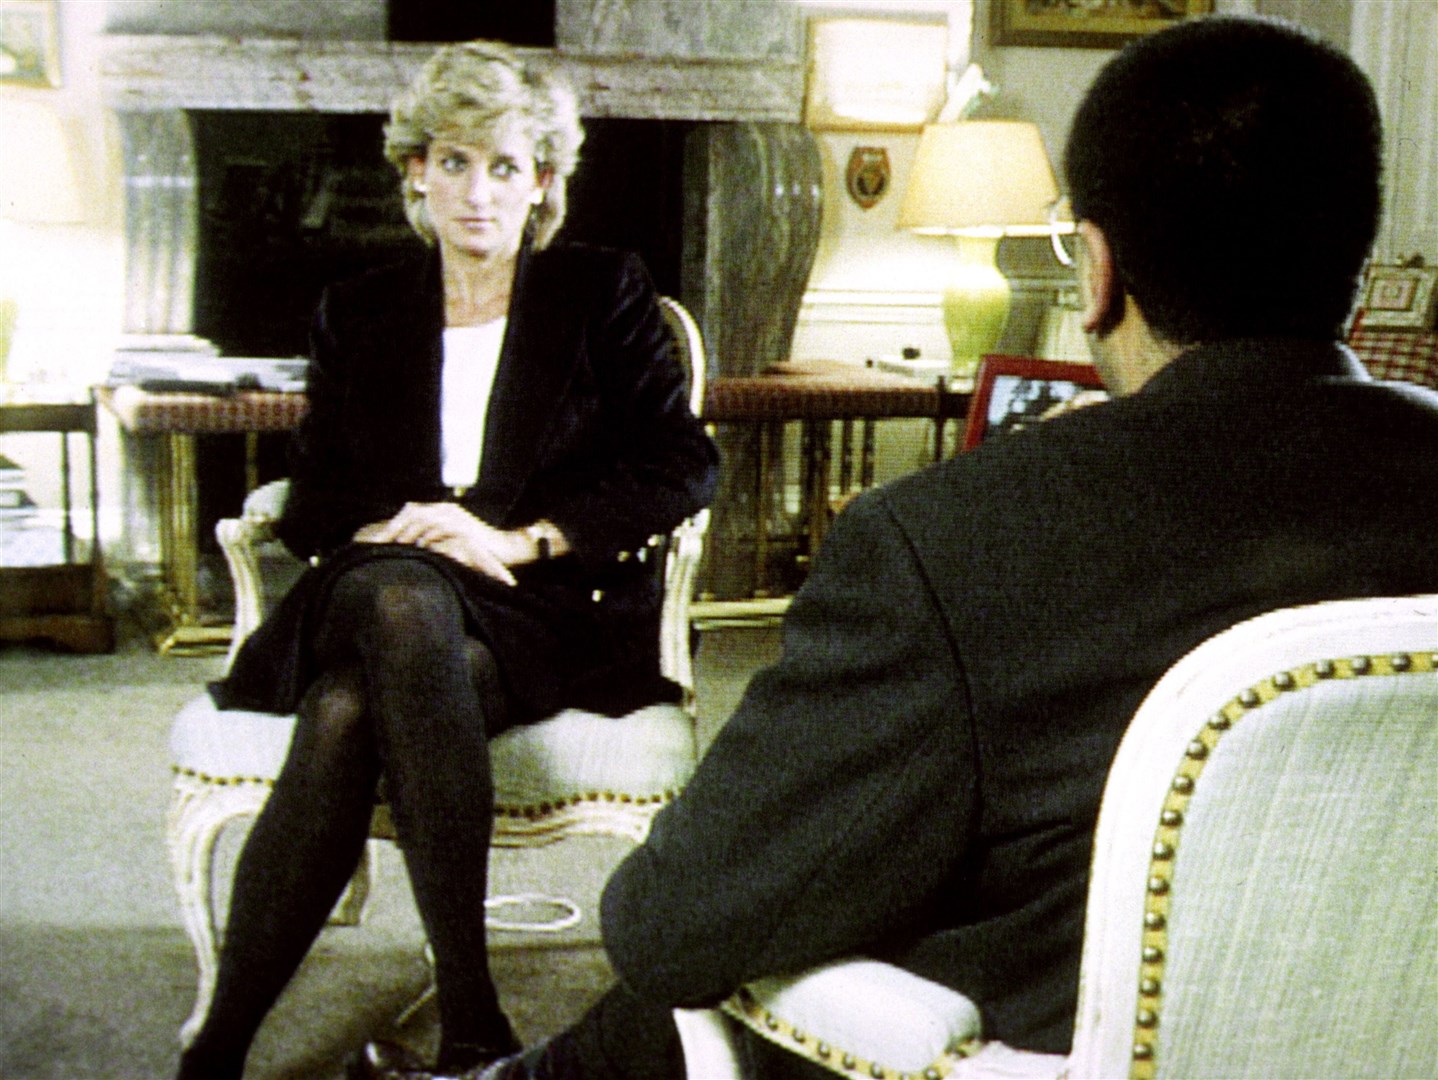 Diana, Princess of Wales, during her interview with Martin Bashir for the BBC’s Panorama in 1995 (BBC/PA)